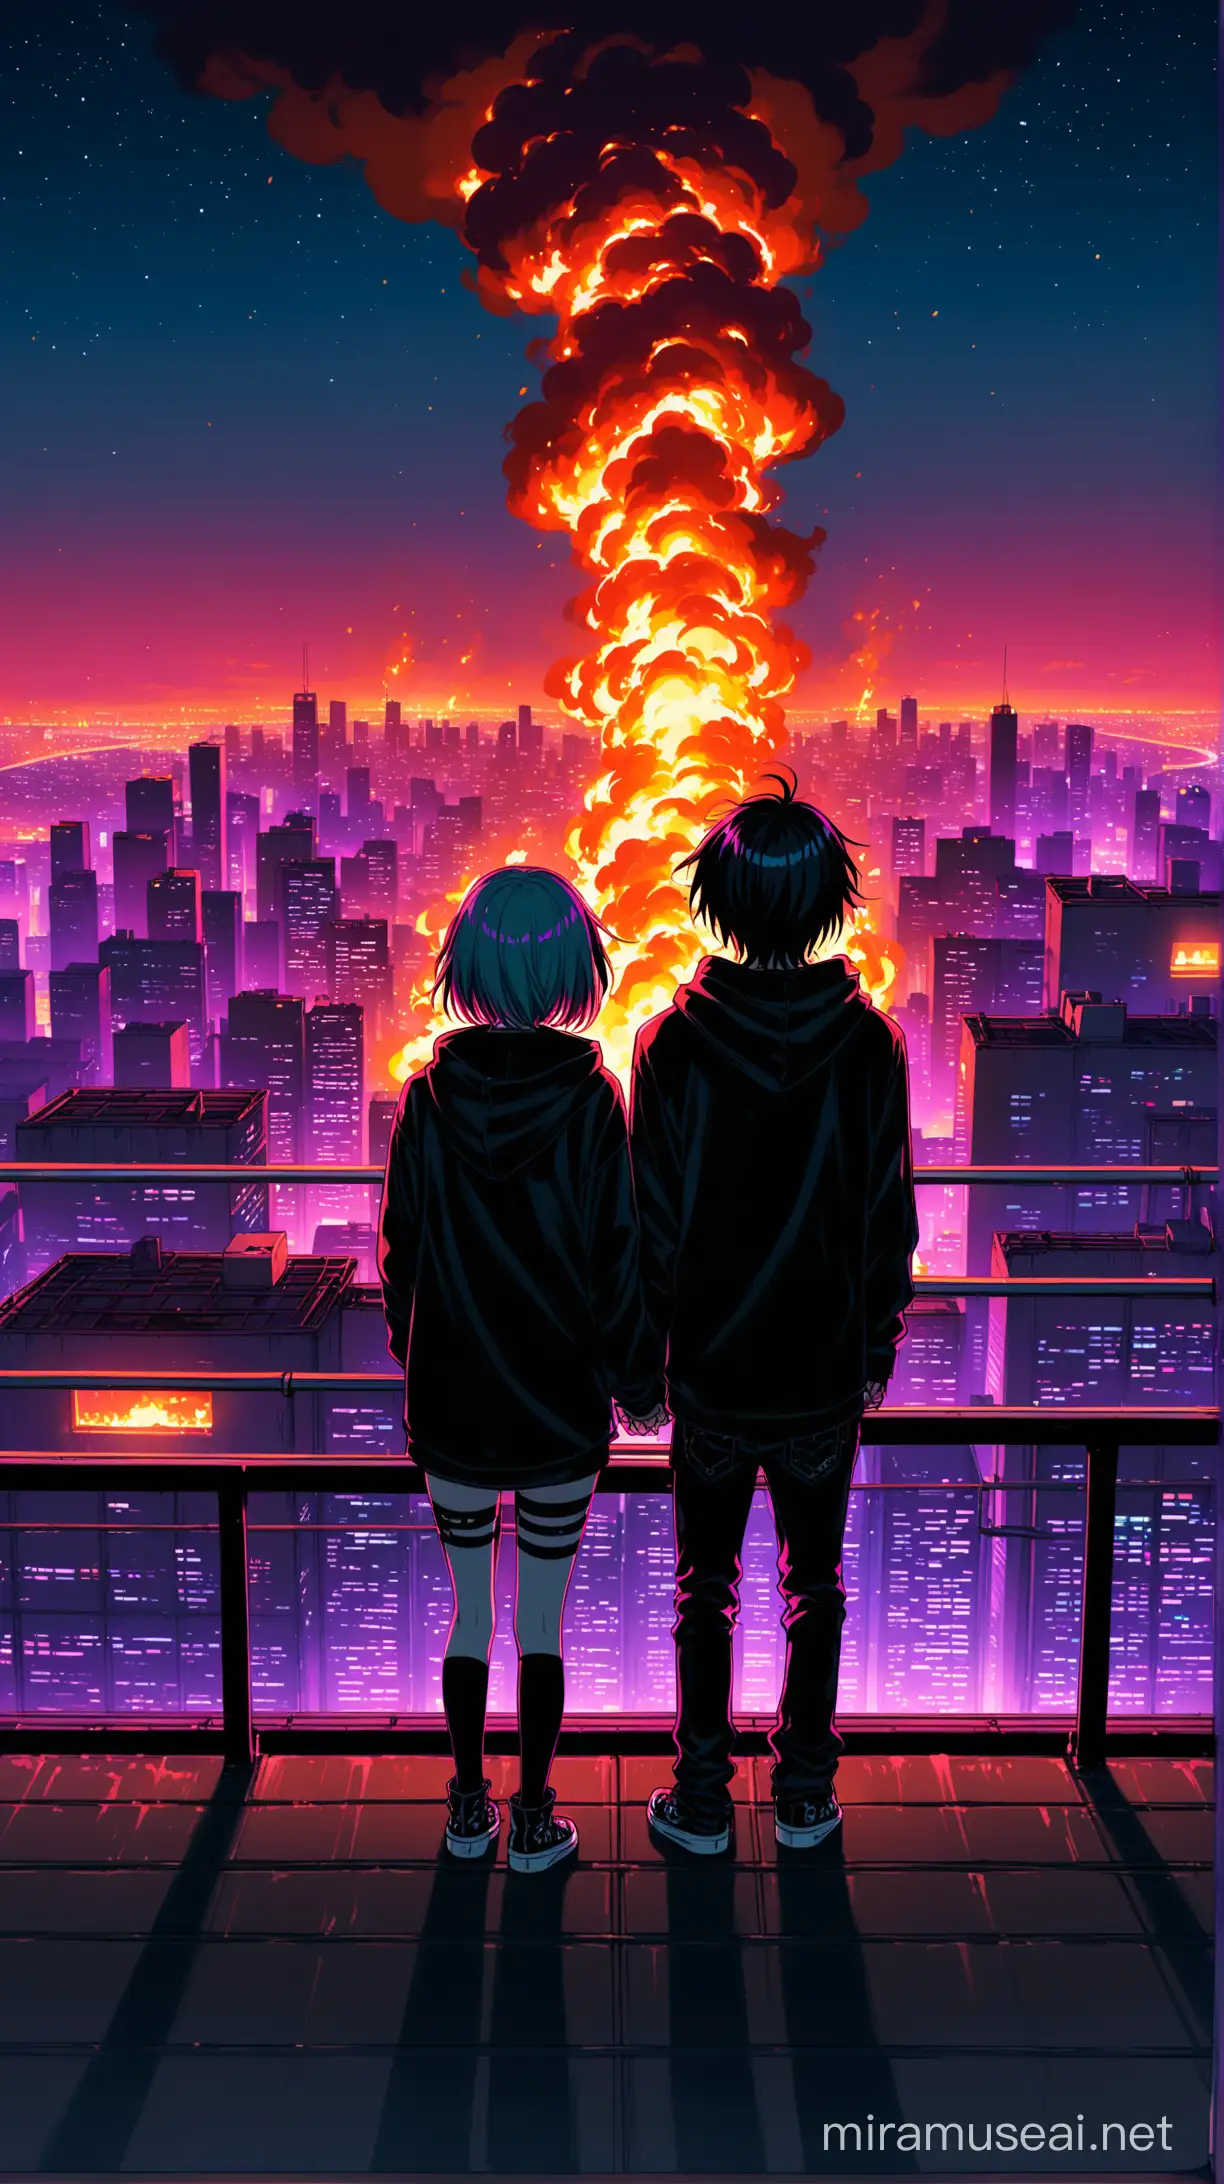 A teenage emo couple standing on a roof looking out over a burning neon city at night